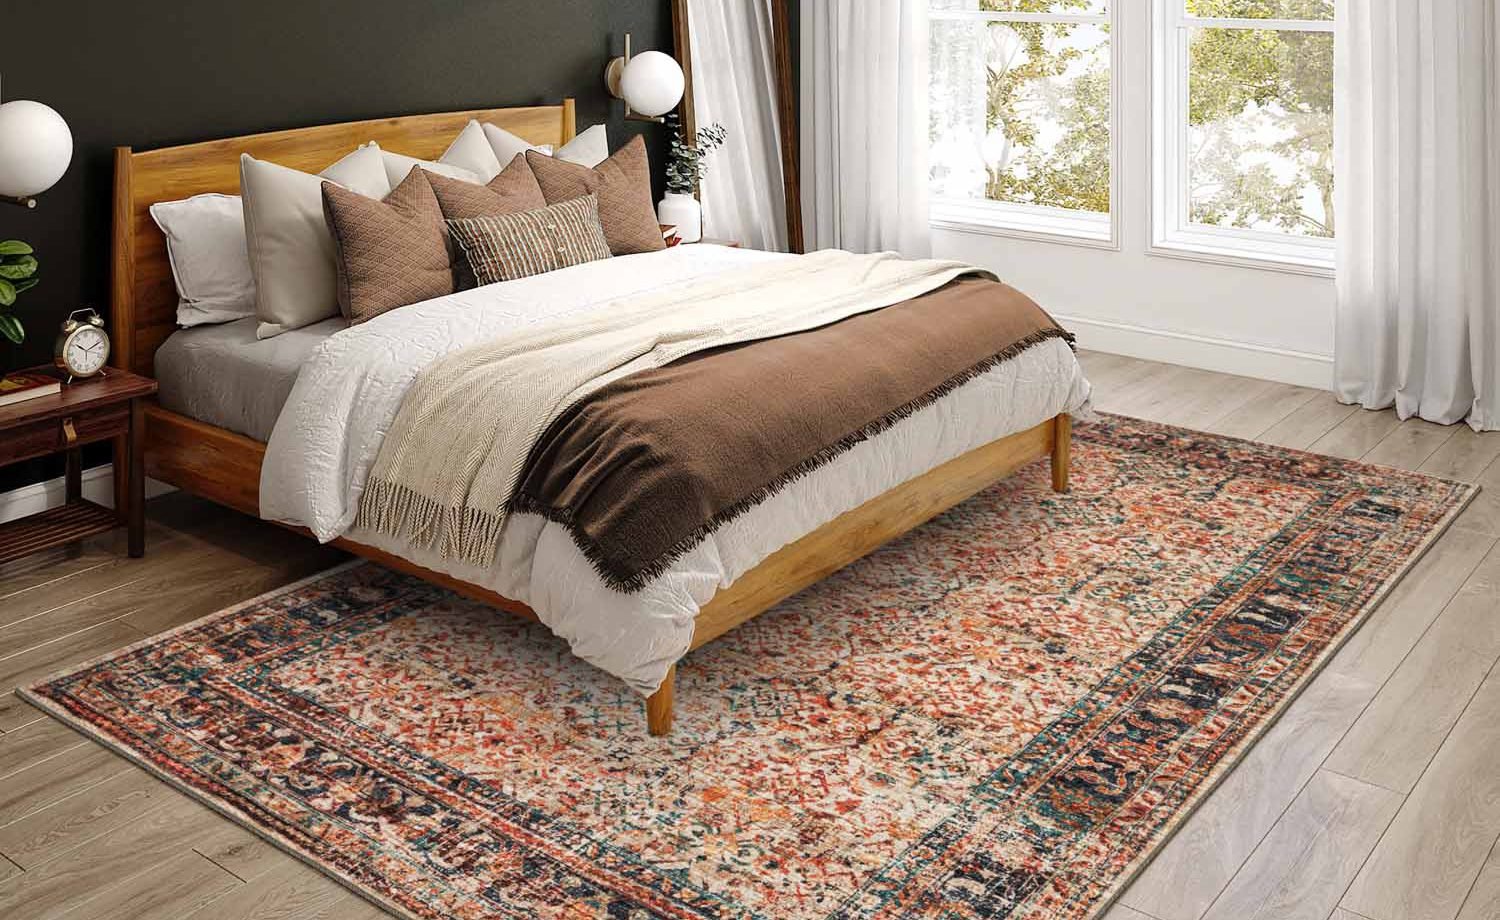 traditional patterned area rug for bedroom at Henson's Greater Tennessee Flooring in Knoxville TN